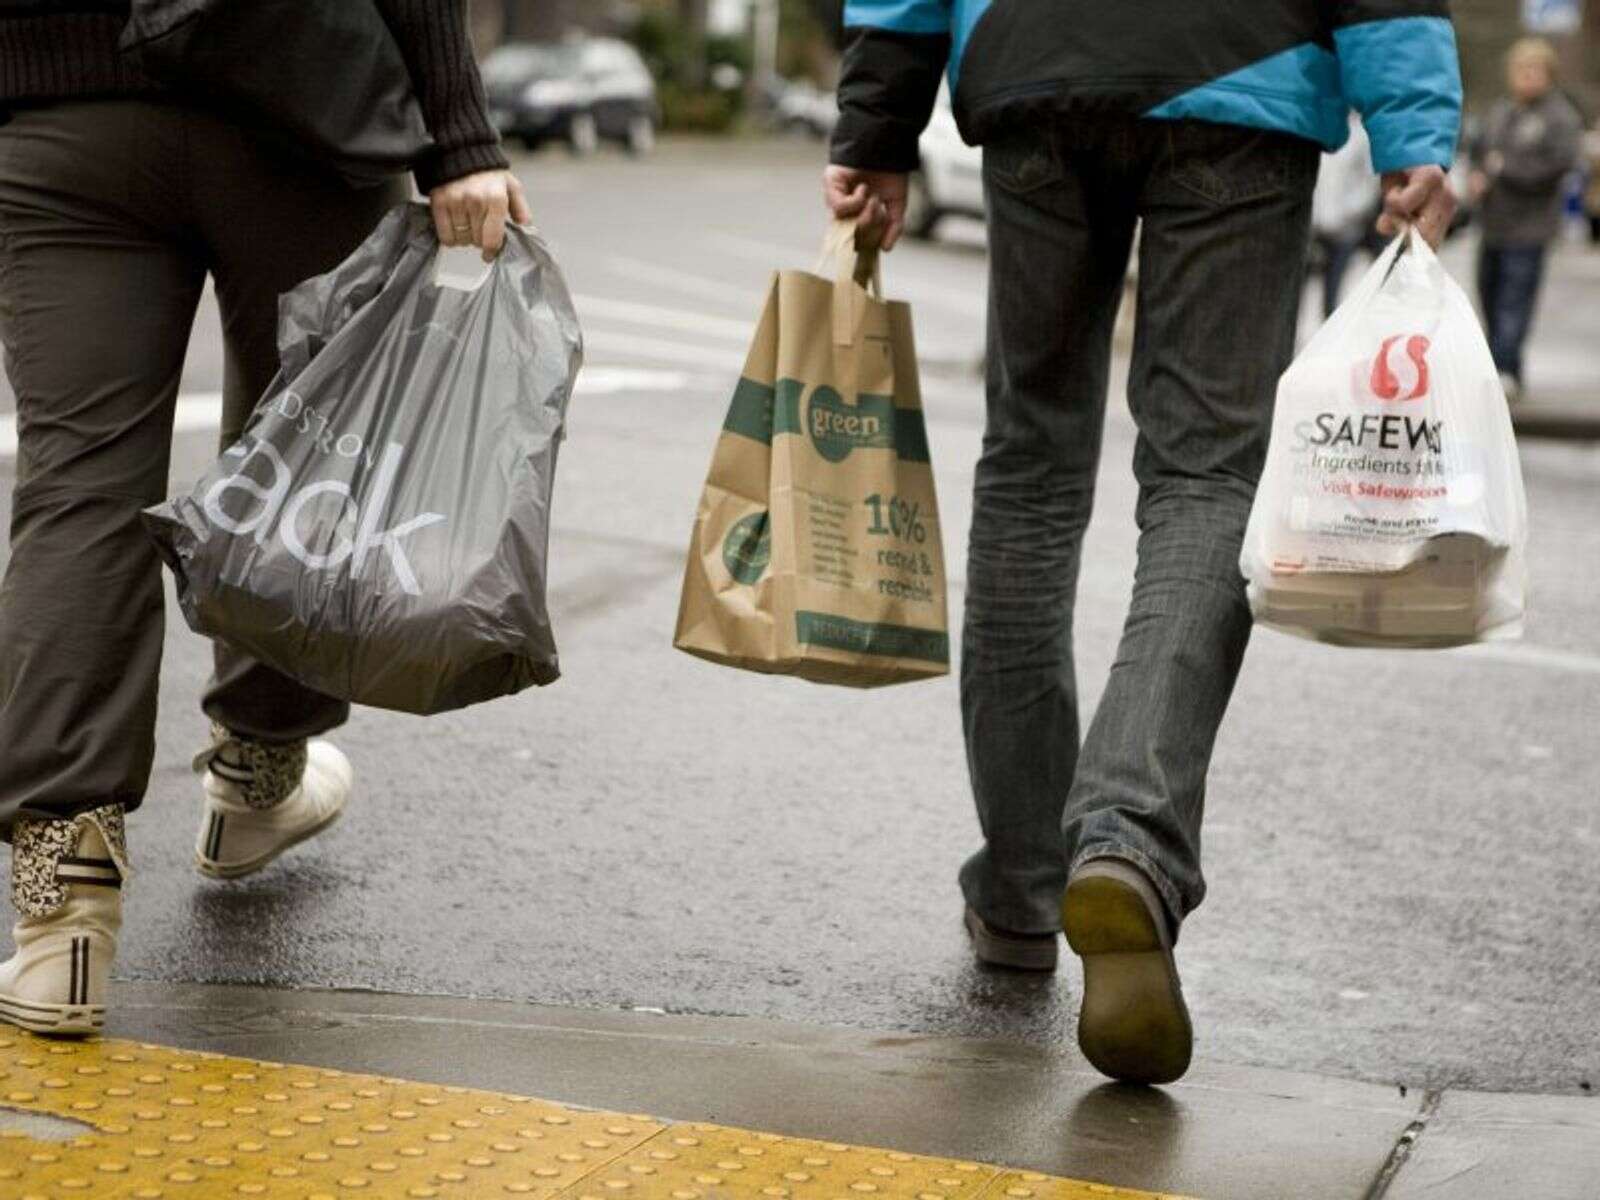 Why are we paying 10 cents for paper bags in Connecticut?